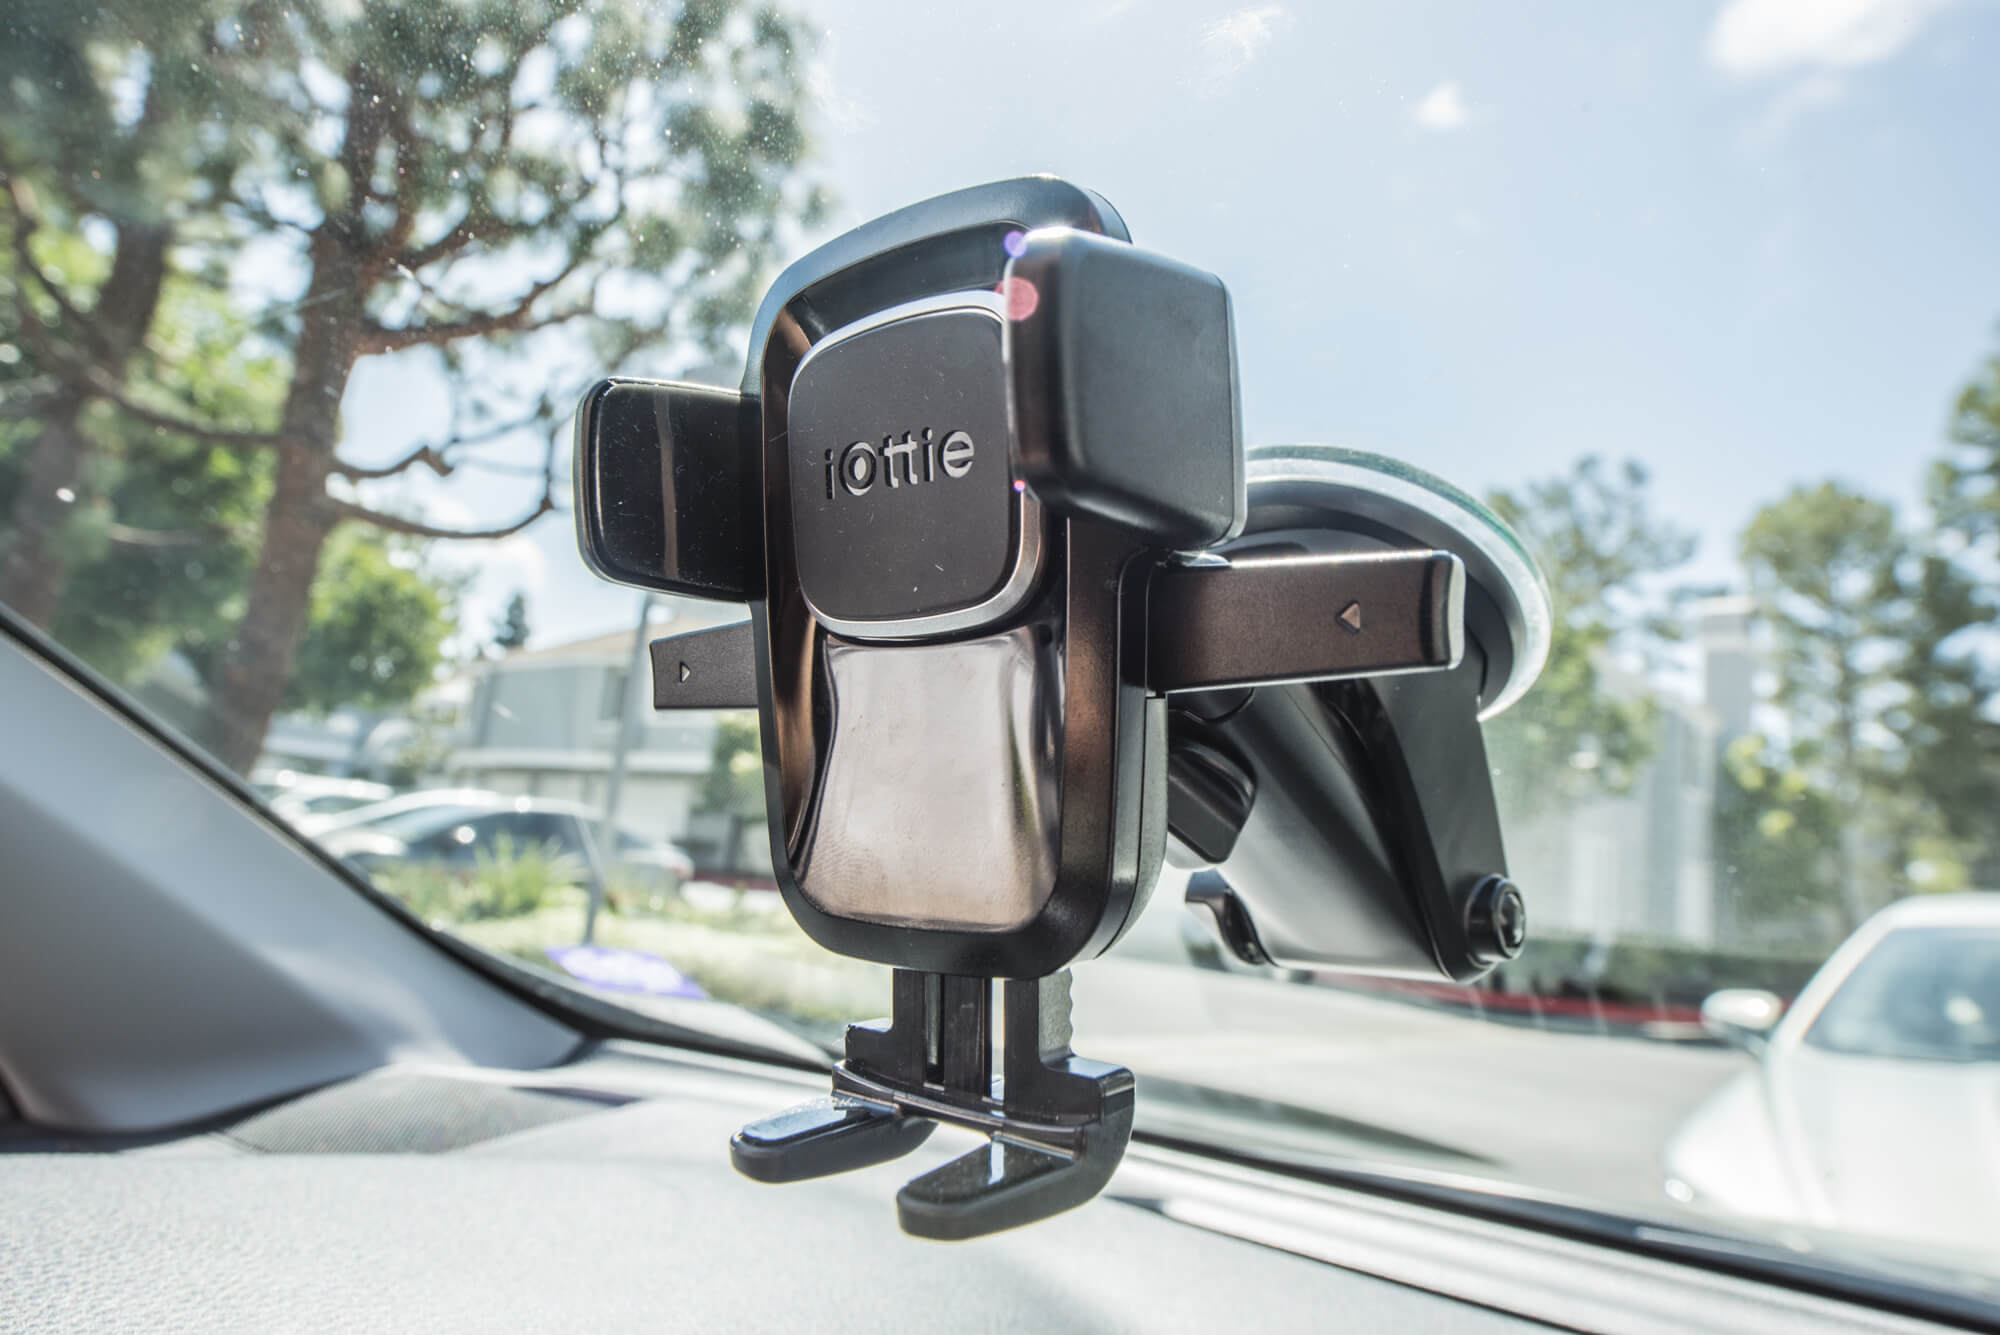 Get iOttie's highly rated iPhone mount for dashboards and windshields for  20% off at